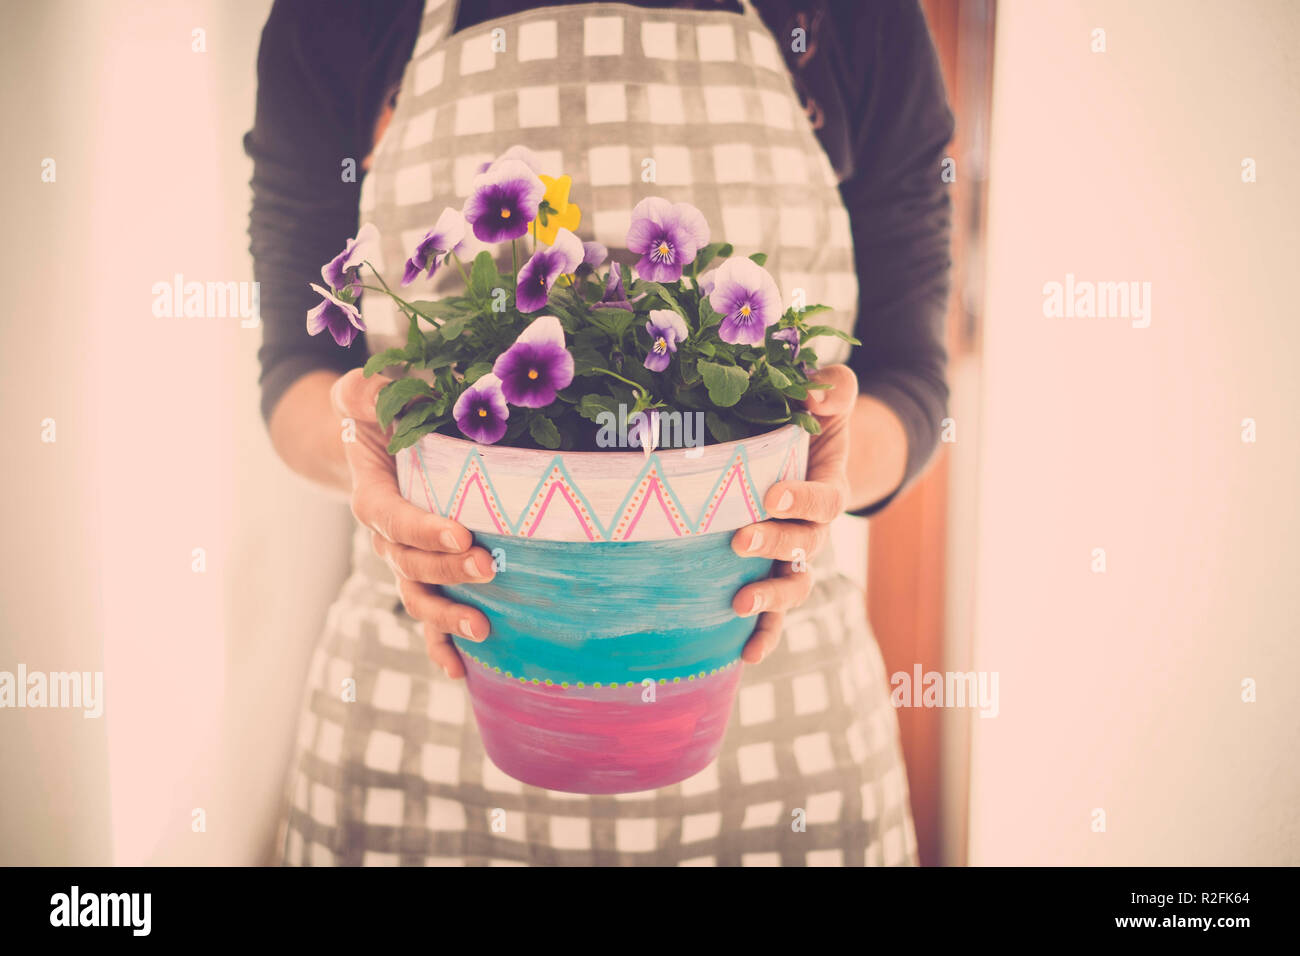 woman hands taking a vas of violet flowers at home. Clothes for home work. Pastel tones and backlight for a bright scene Stock Photo